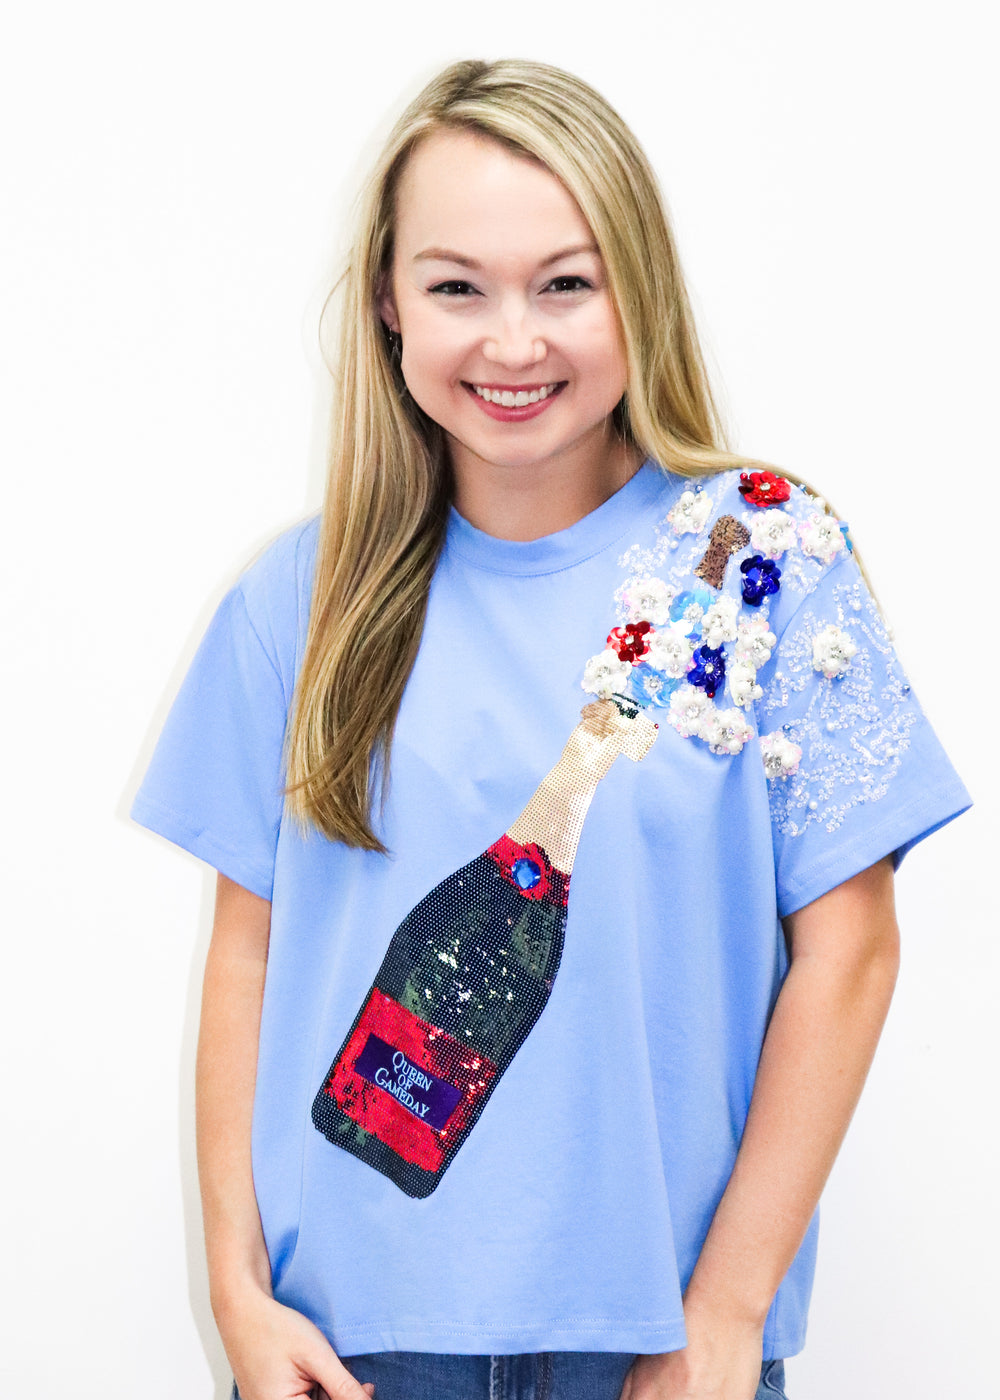 Queen of Sparkles Powder Blue, Red/White Popping Champagne Tee - Gabrielle's Biloxi